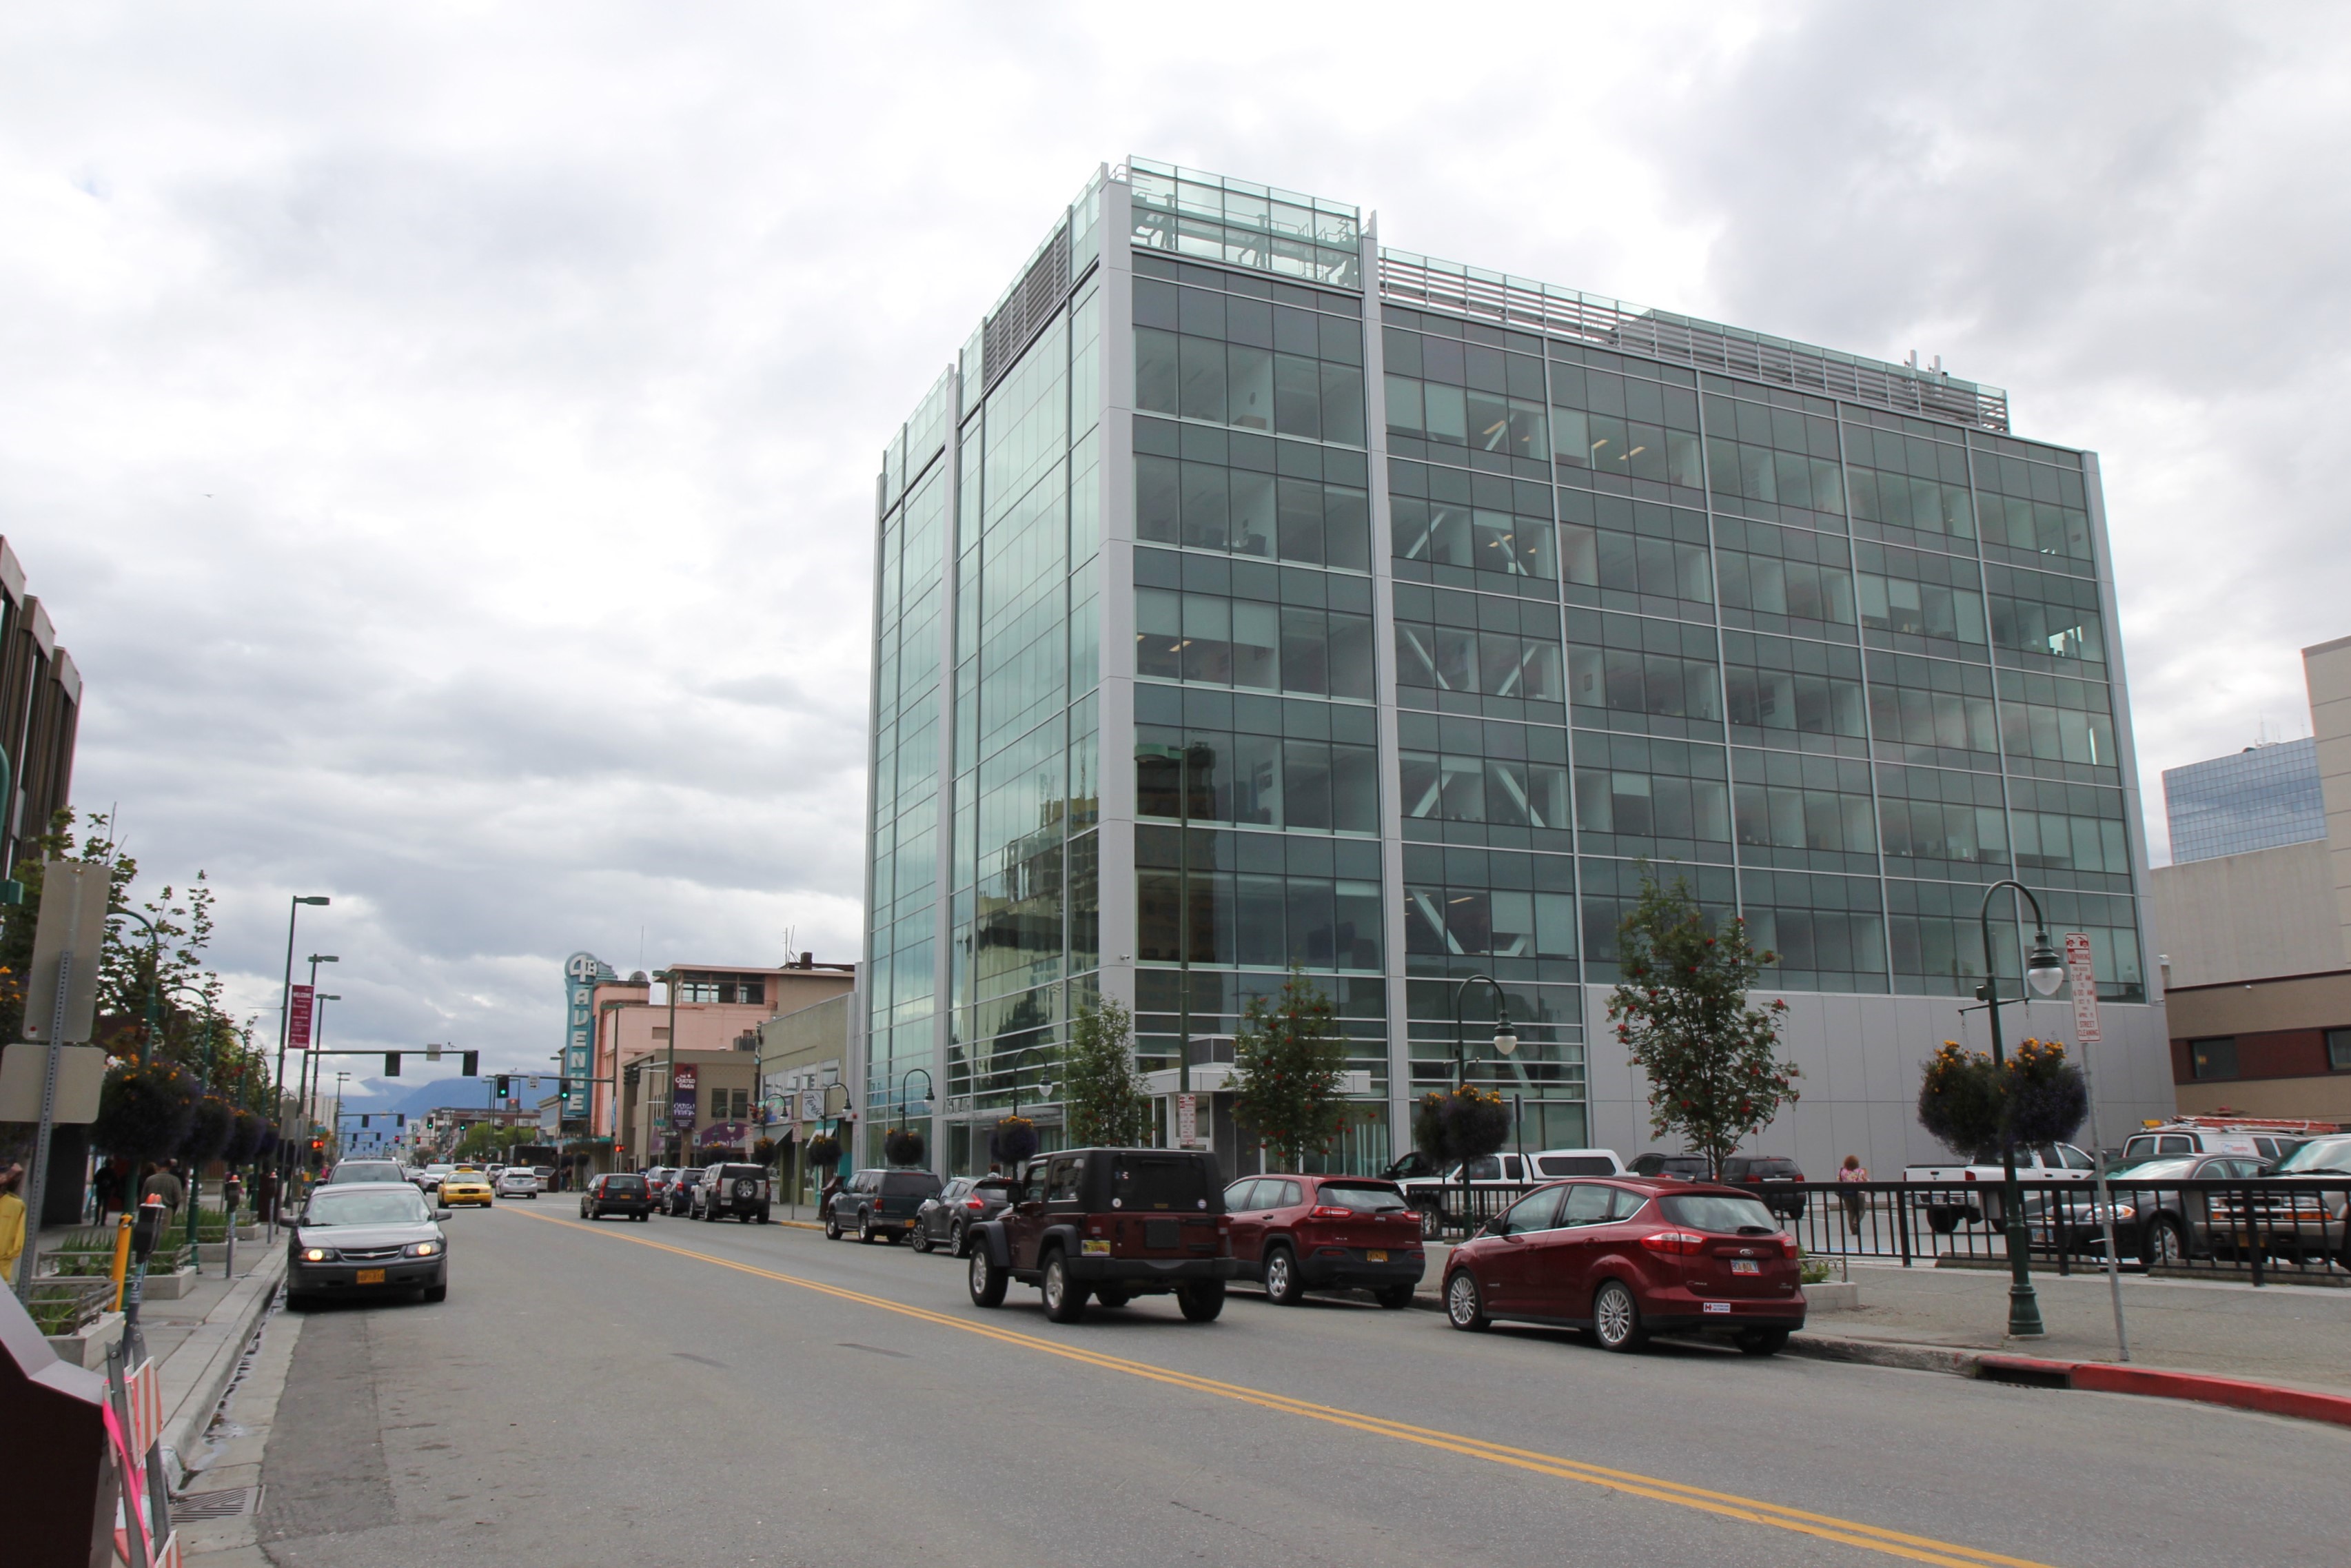 The Legislative Information Office in downtown Anchorage.